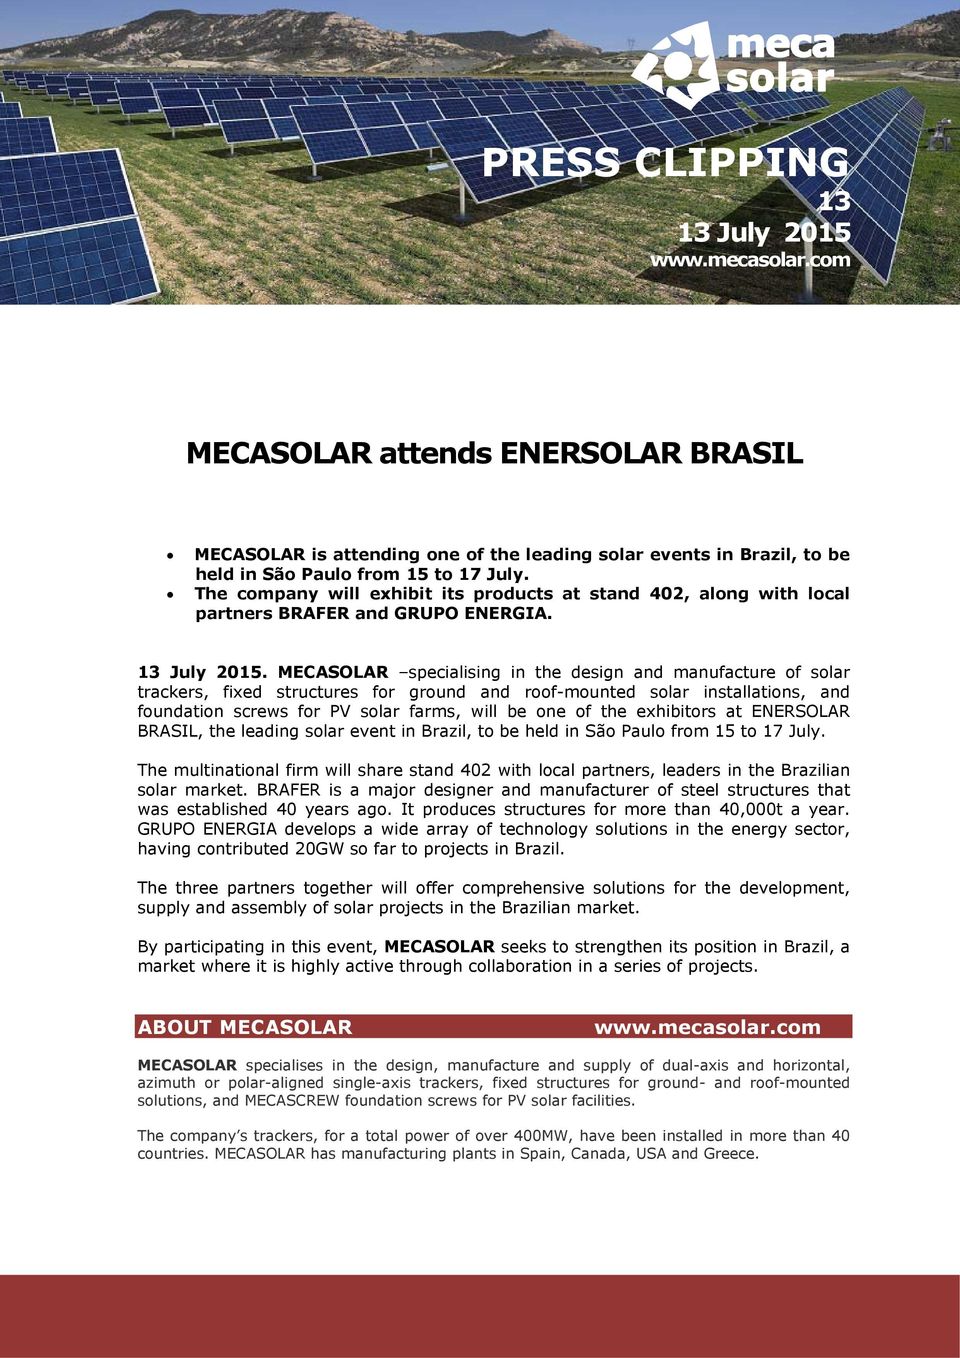 MECASOLAR specialising in the design and manufacture of solar trackers, fixed structures for ground and roof-mounted solar installations, and foundation screws for PV solar farms, will be one of the